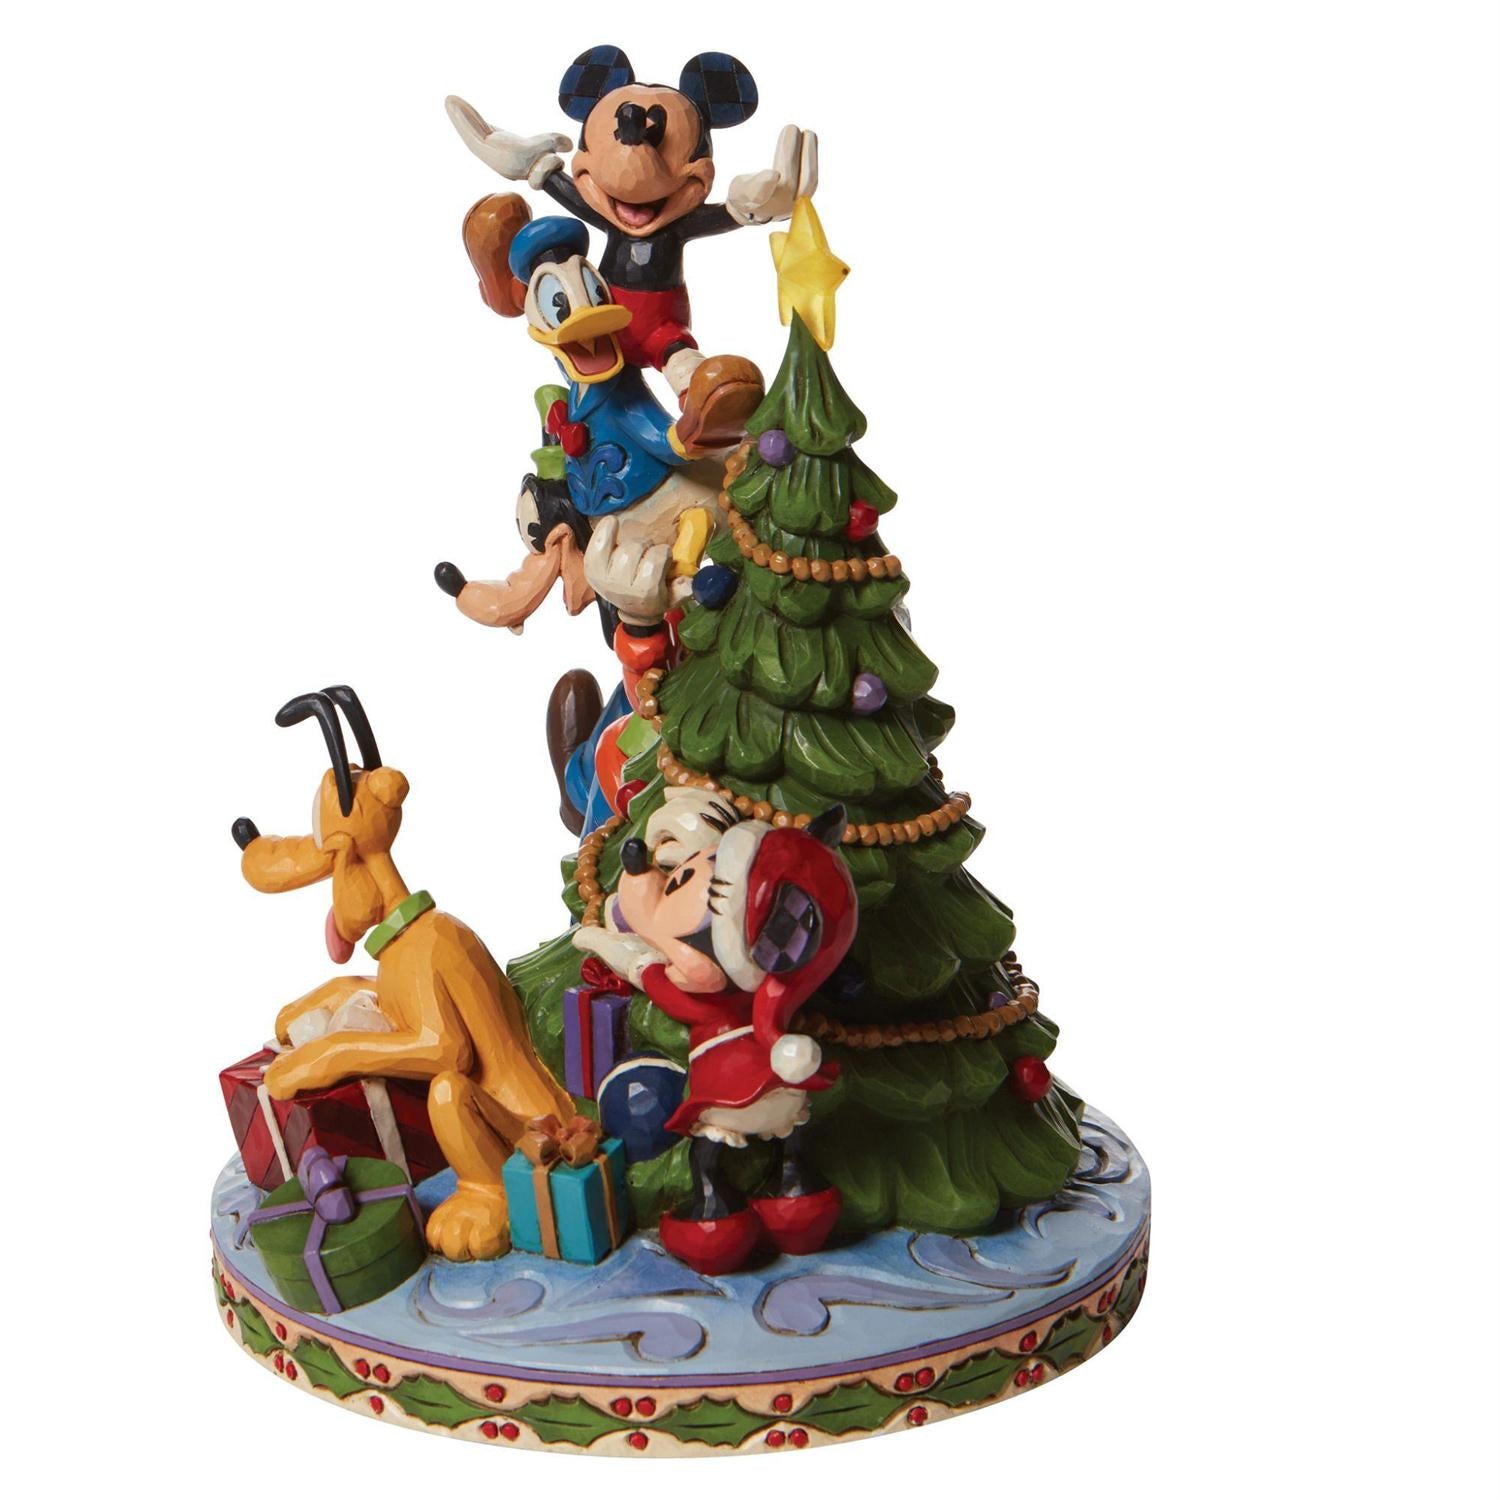 friends form a teetering tower to hoist him to the top of the Mouse family tree.